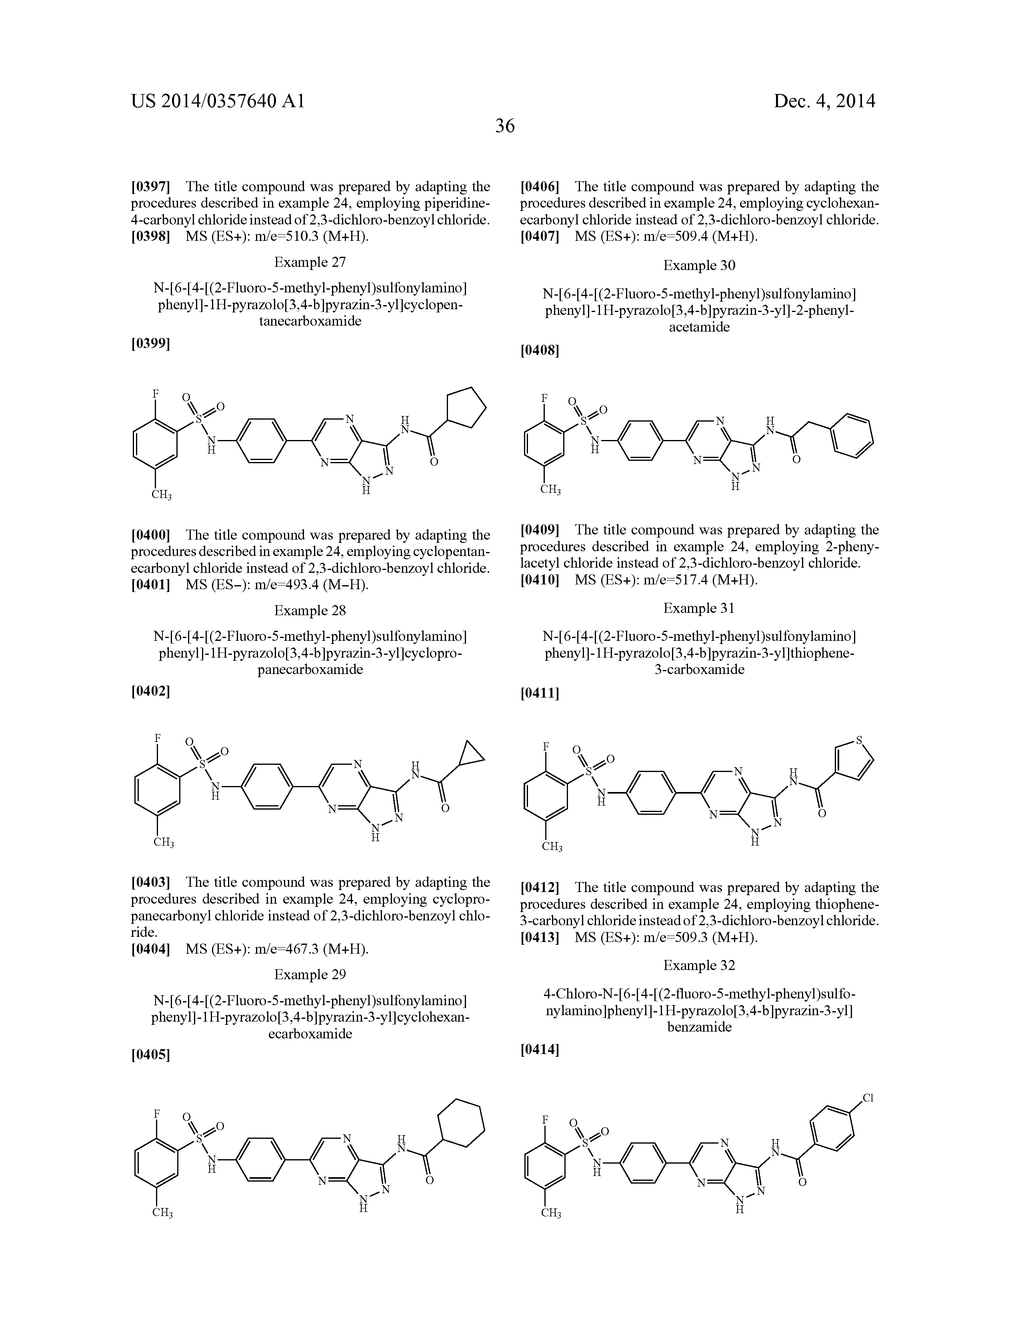 N-[4-(1H-PYRAZOLO[3,4-B]PYRAZIN-6-YL)-PHENYL]-SULFONAMIDES AND THEIR USE     AS PHARMACEUTICALS - diagram, schematic, and image 37